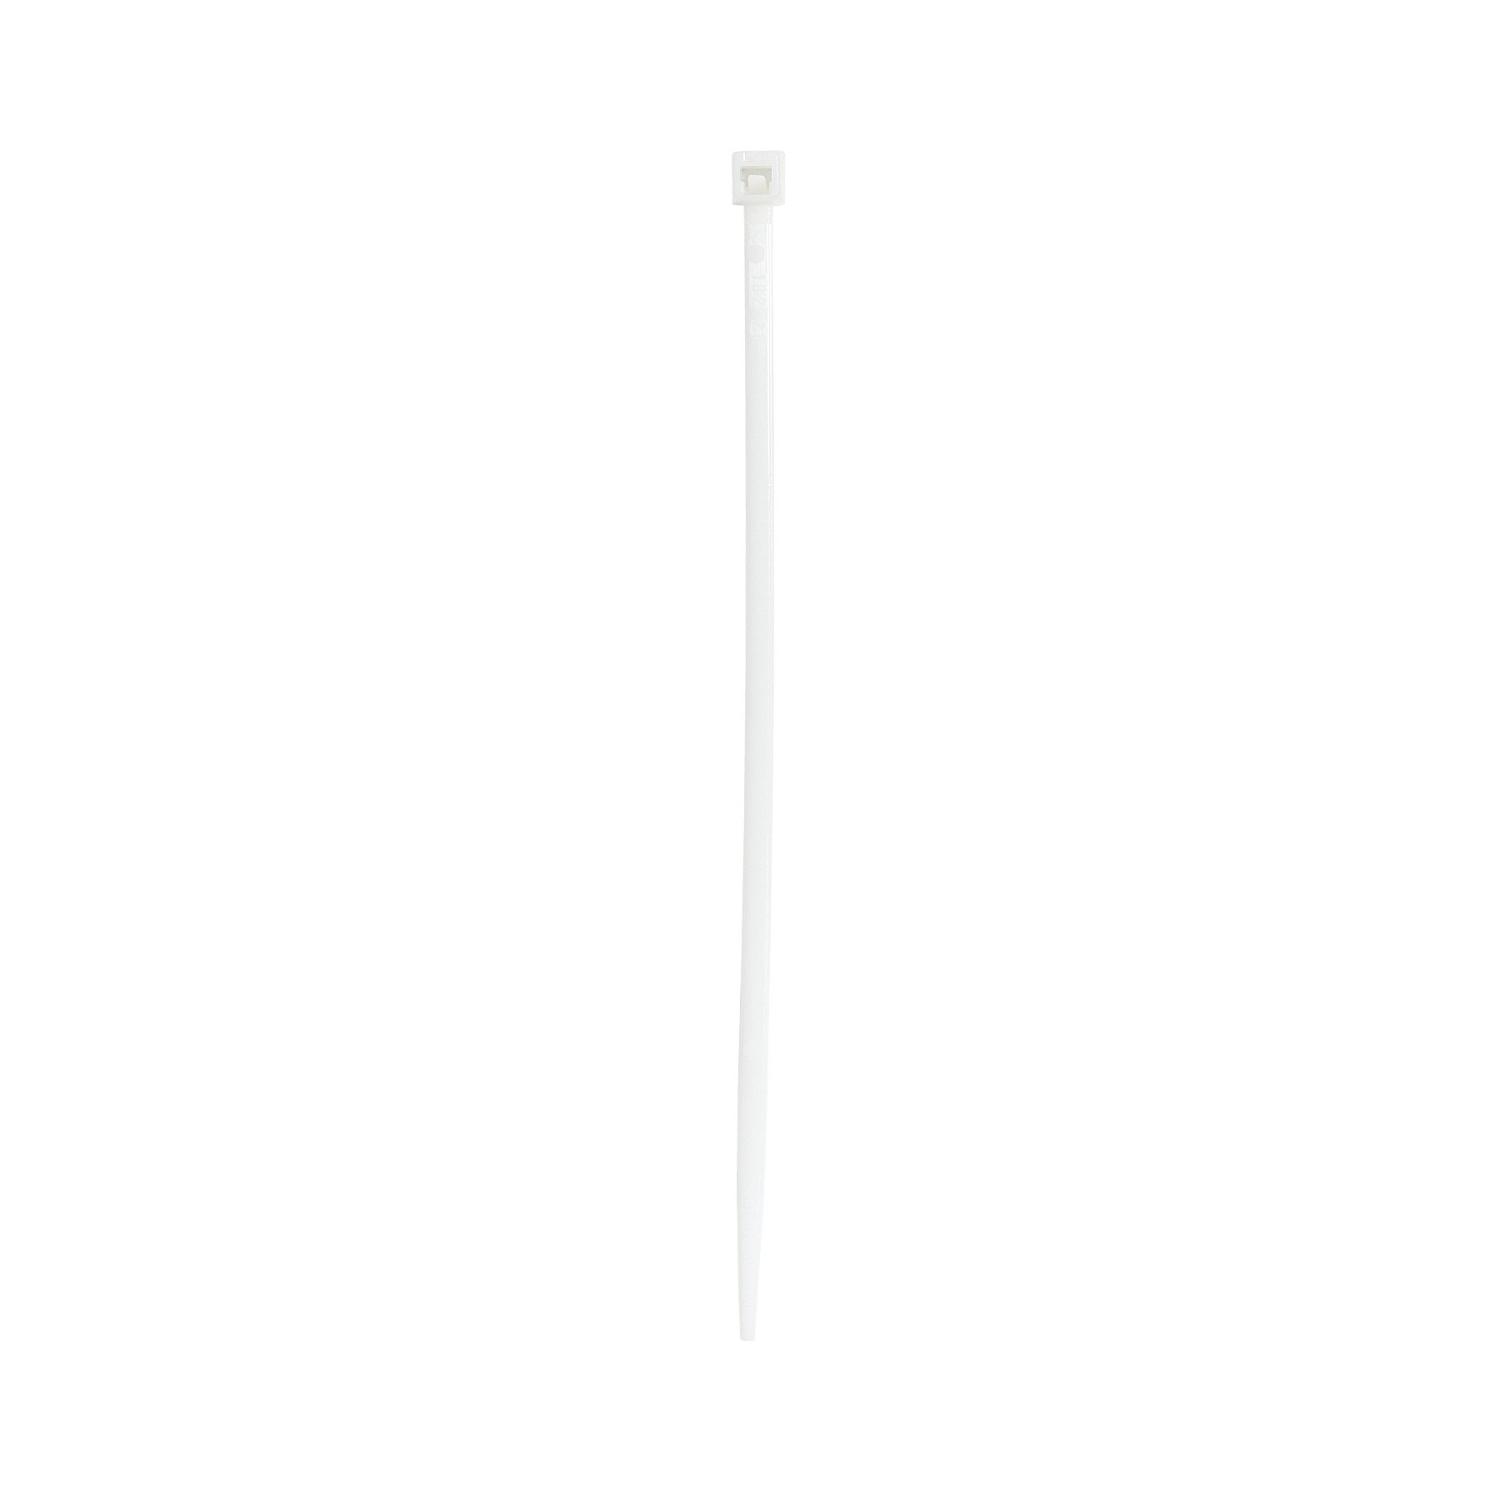 Thomas & Betts TY400-50-100 Catamount Standard Cable Tie